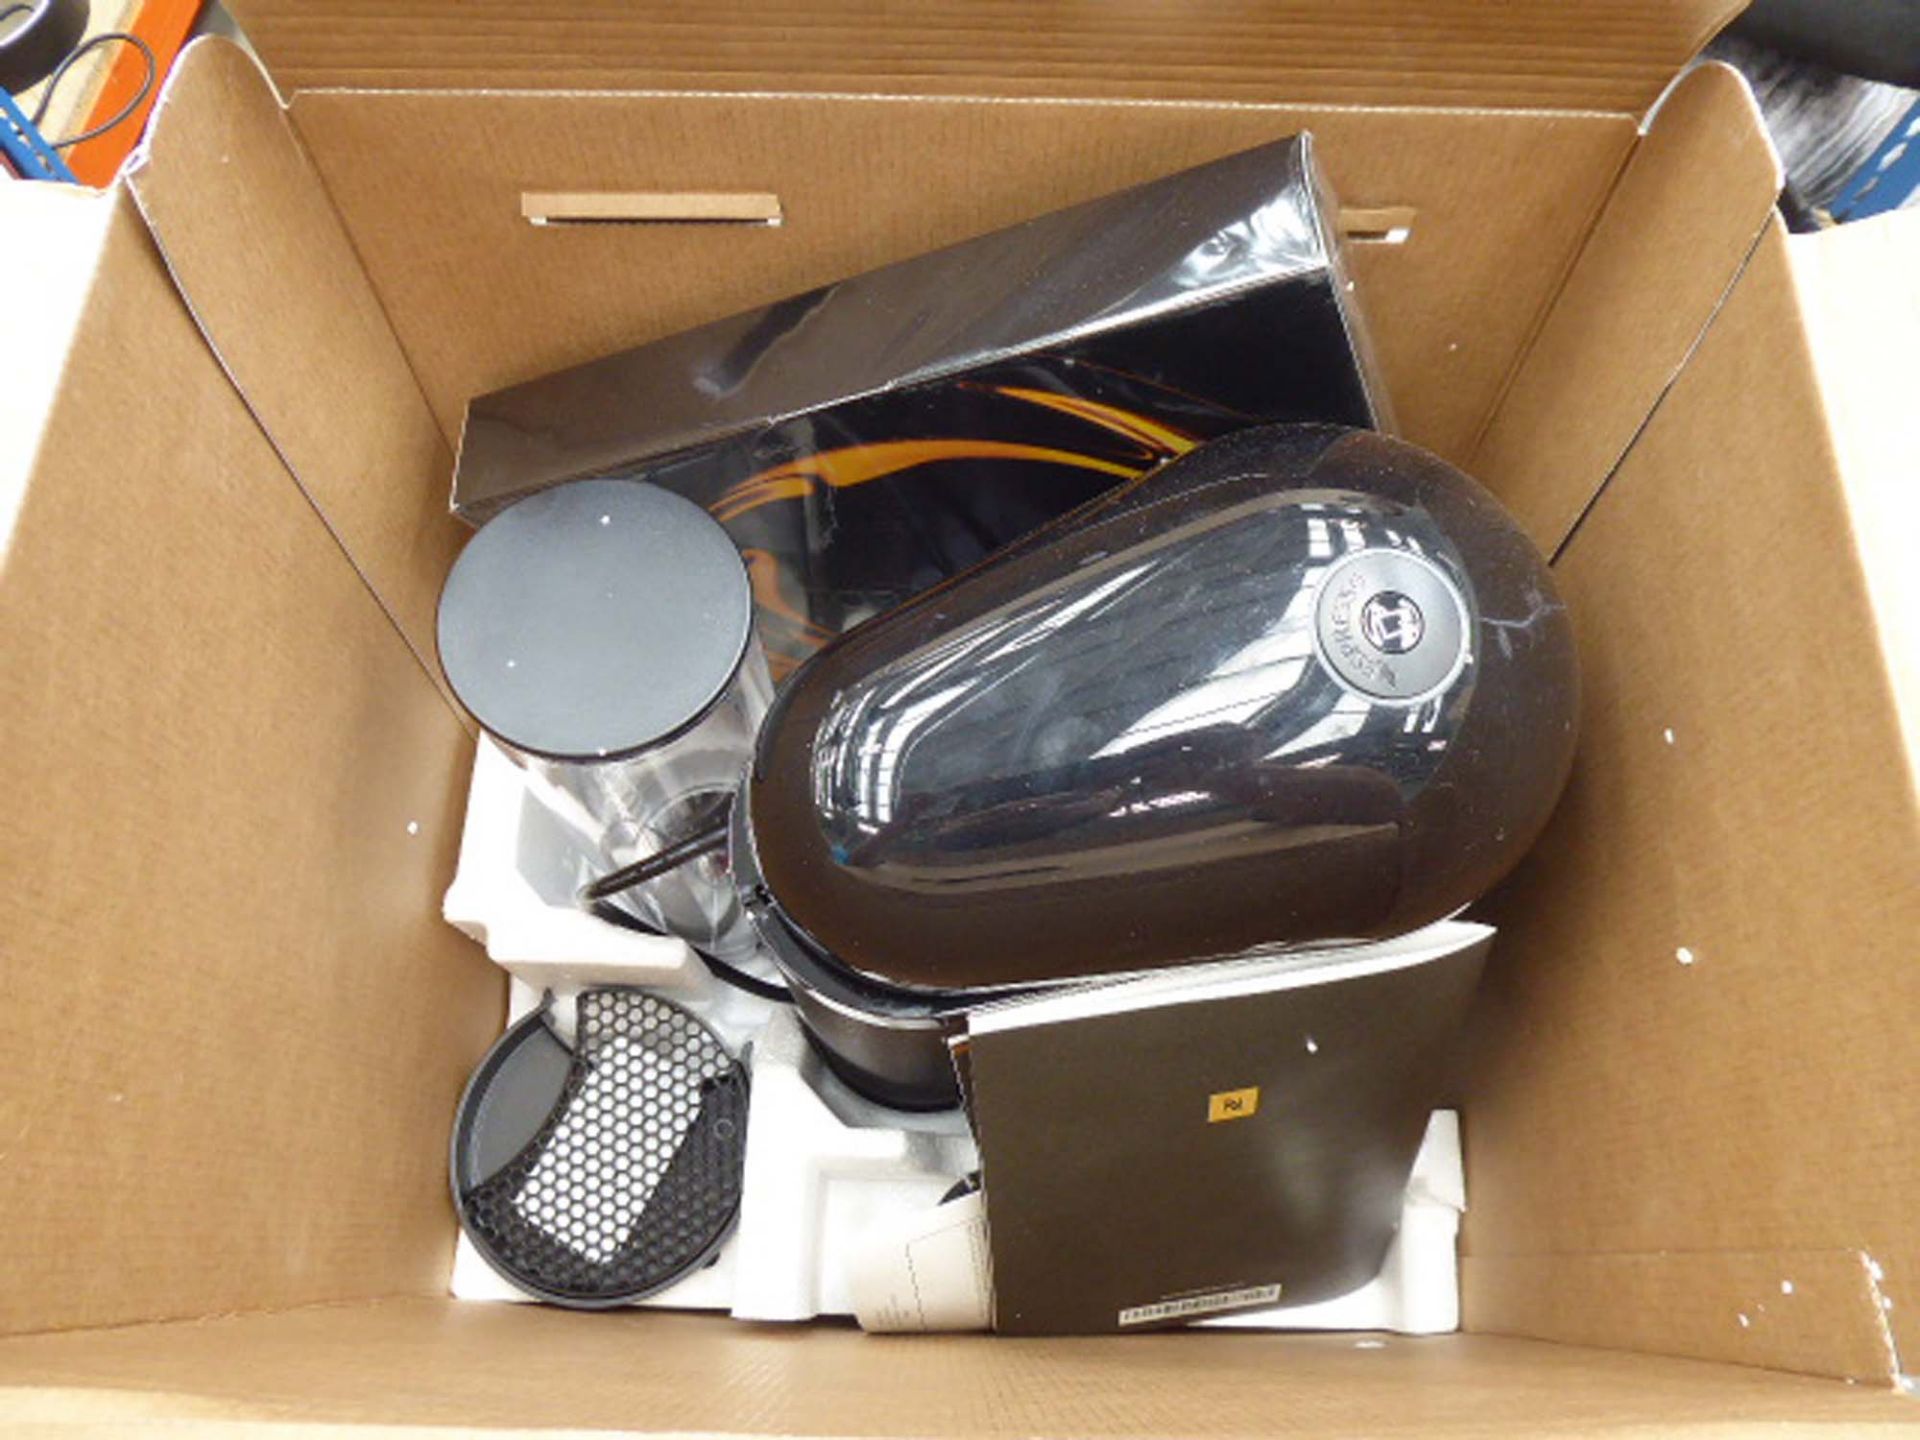 3122 - Nespresso Virtue Plus coffee machine with box Used, appears to be complete - Image 2 of 2